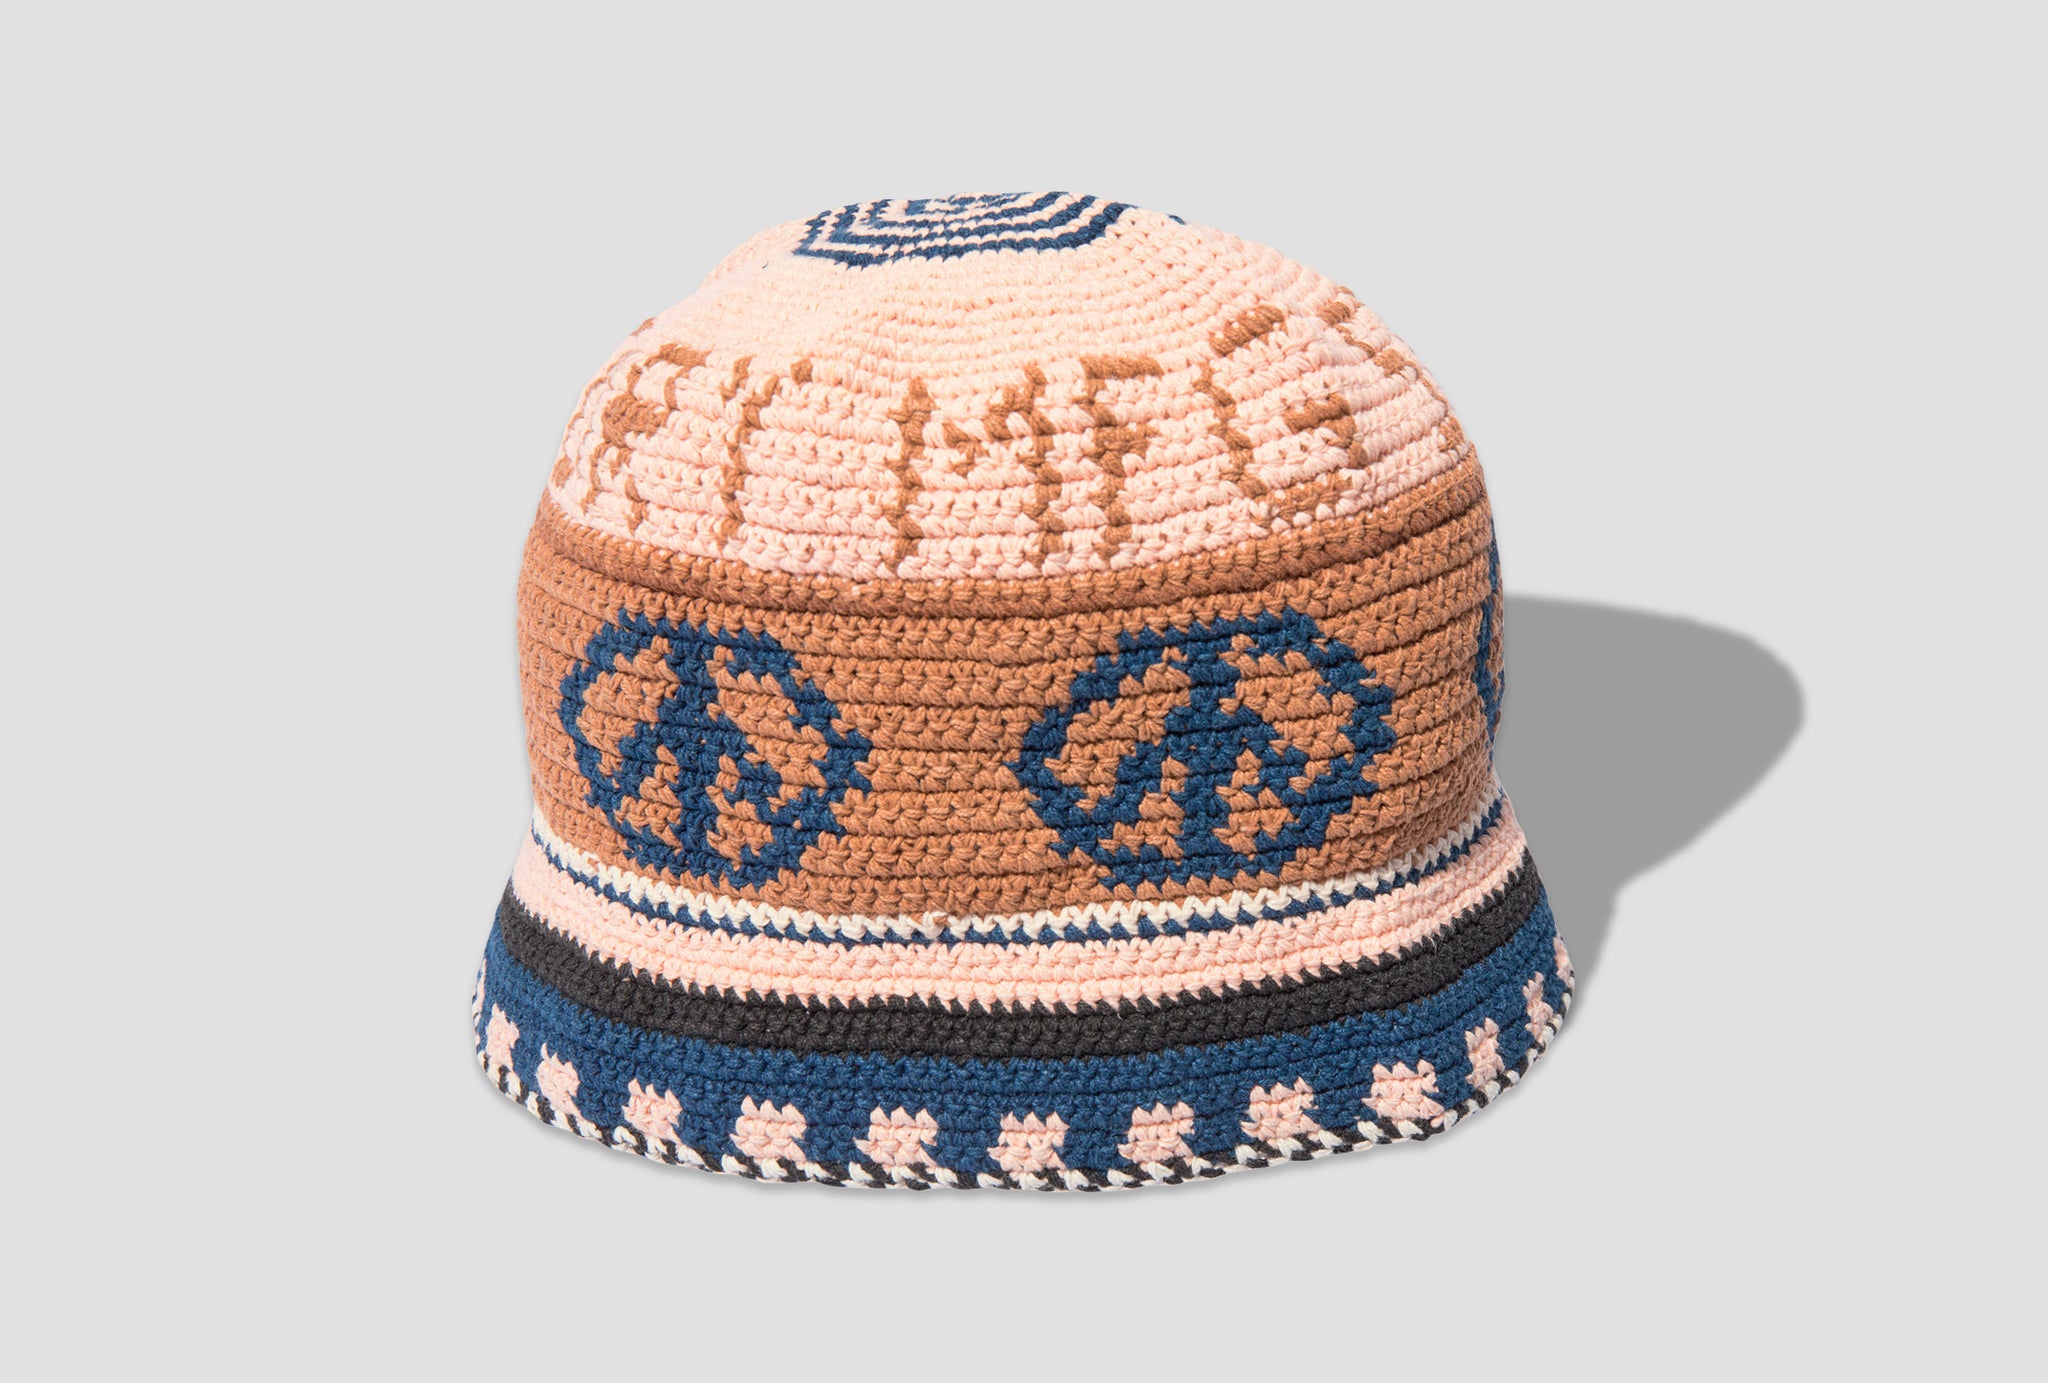 BREW HAT - PEACE POWER PEACH BRW-PPP Light pink